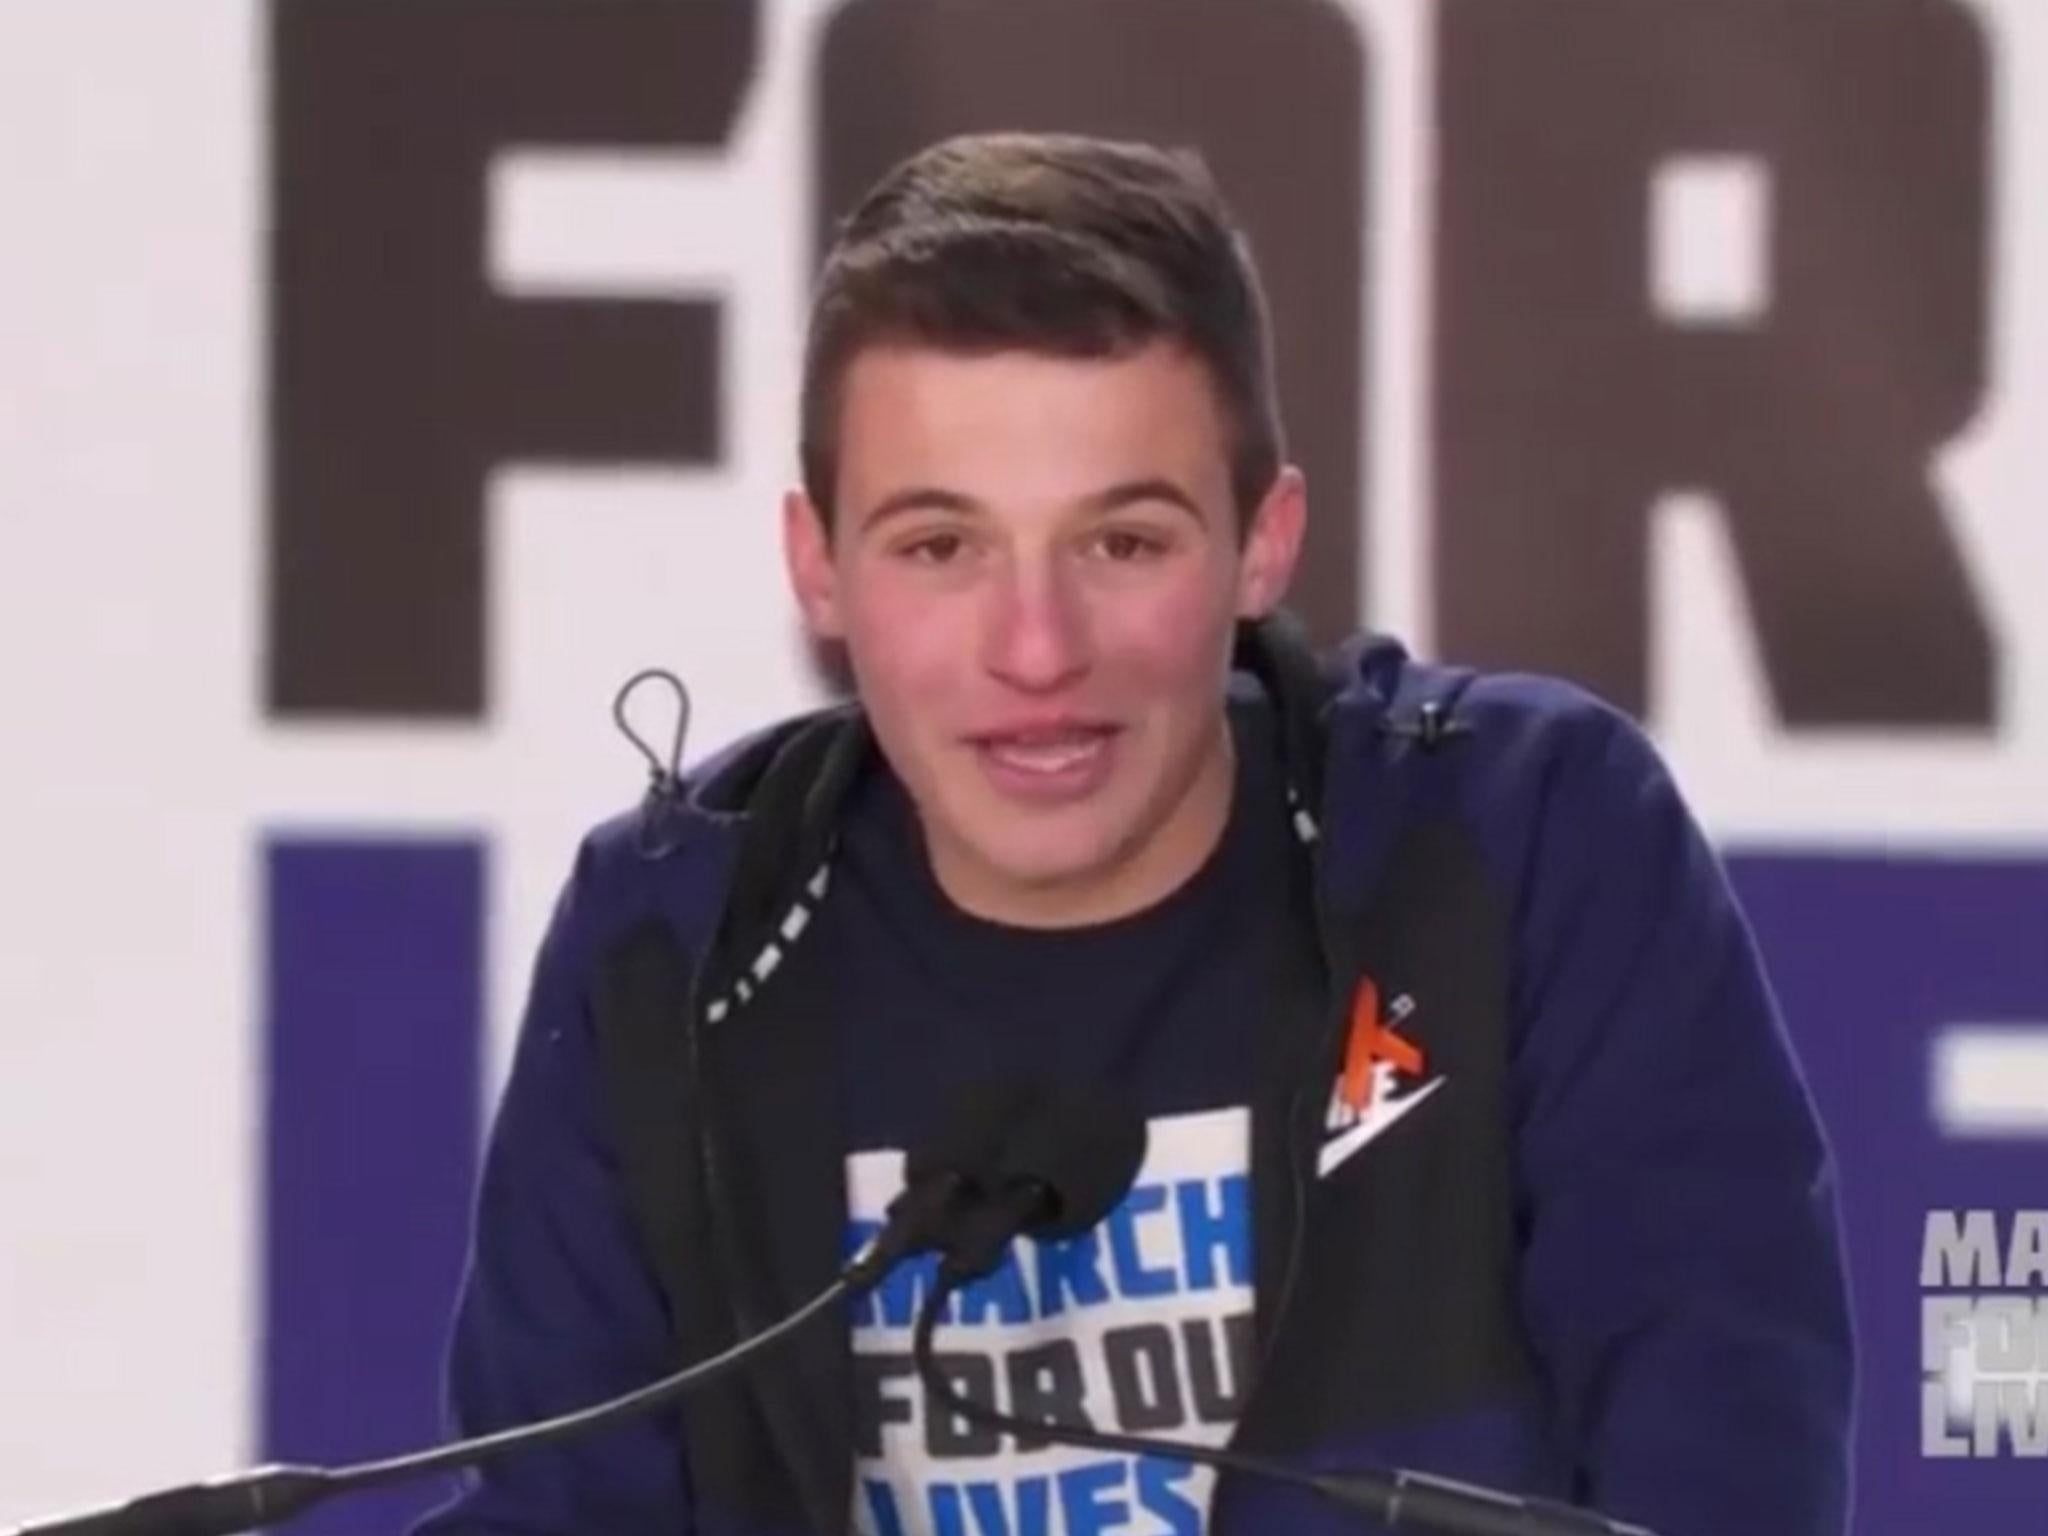 Cameron Kasky co-founded the student-led gun violence prevention advocacy group Never Again MSD